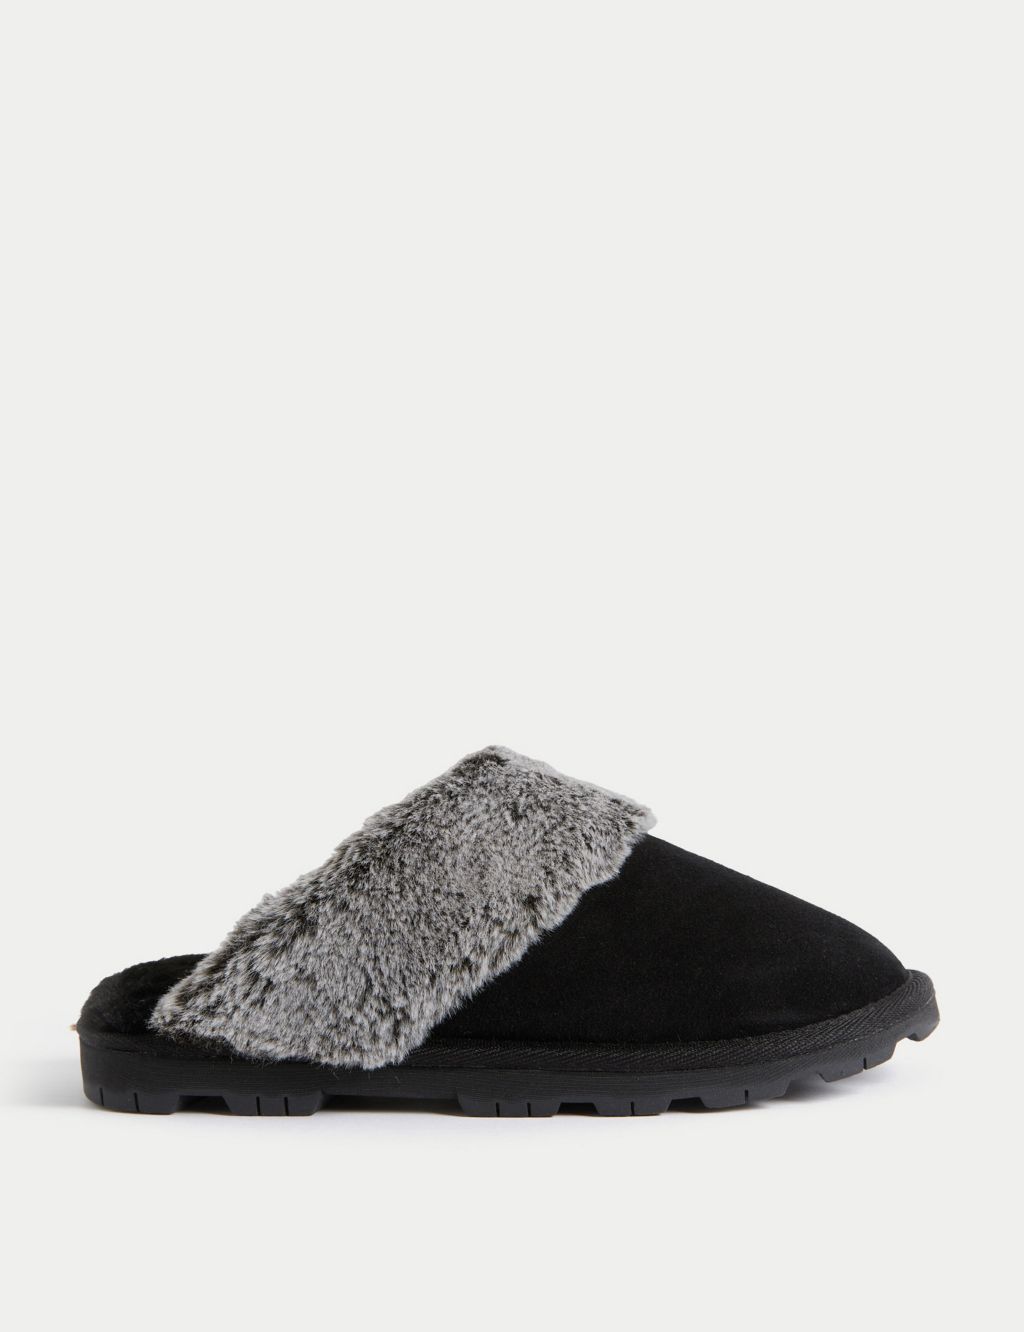 Suede Faux Fur Lined Mule Slippers image 1